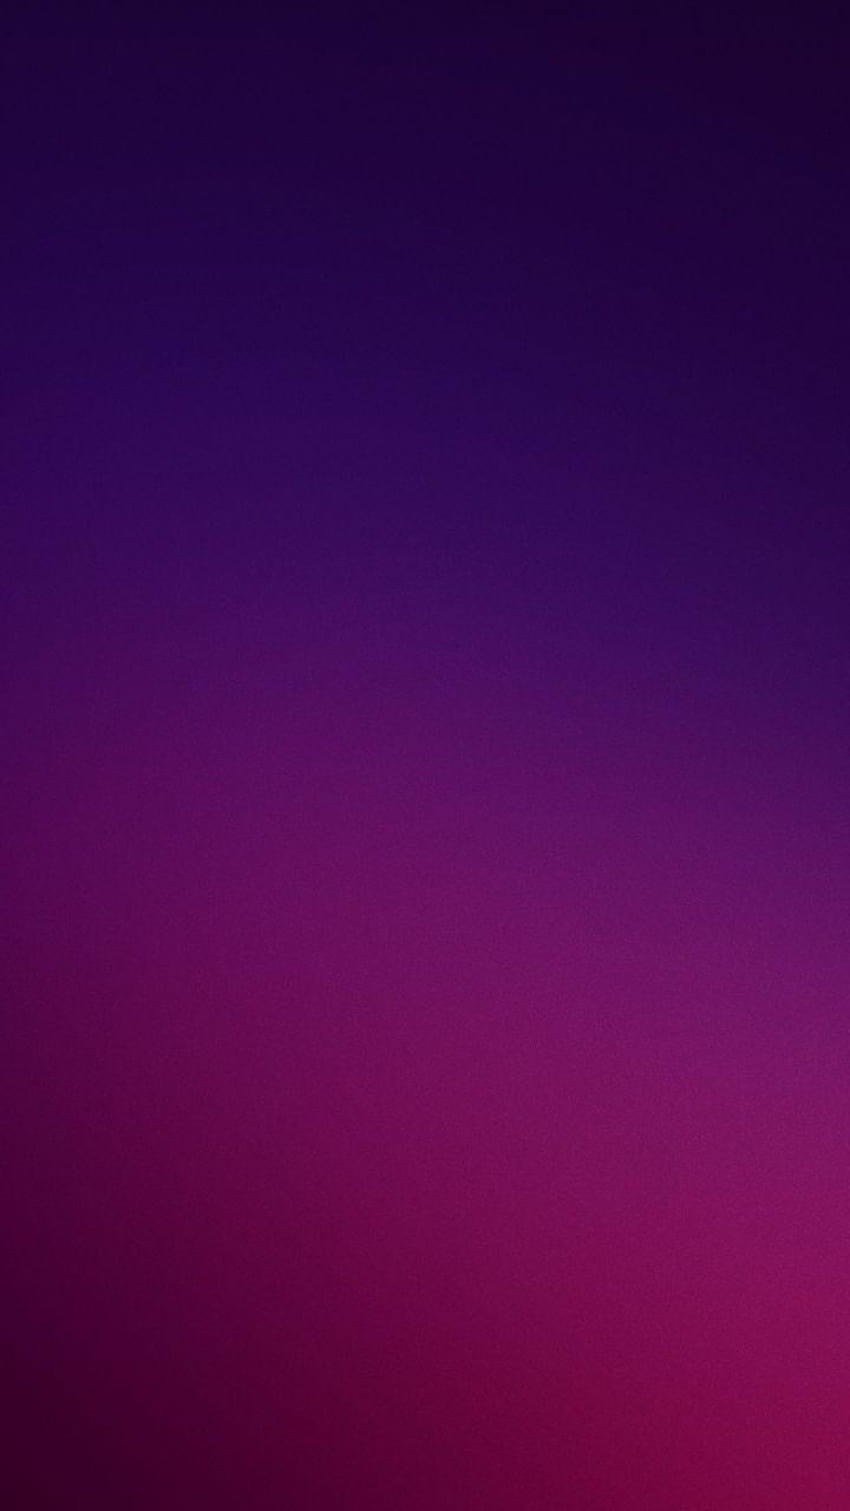 Solid Color Background Wallpapers for Phone